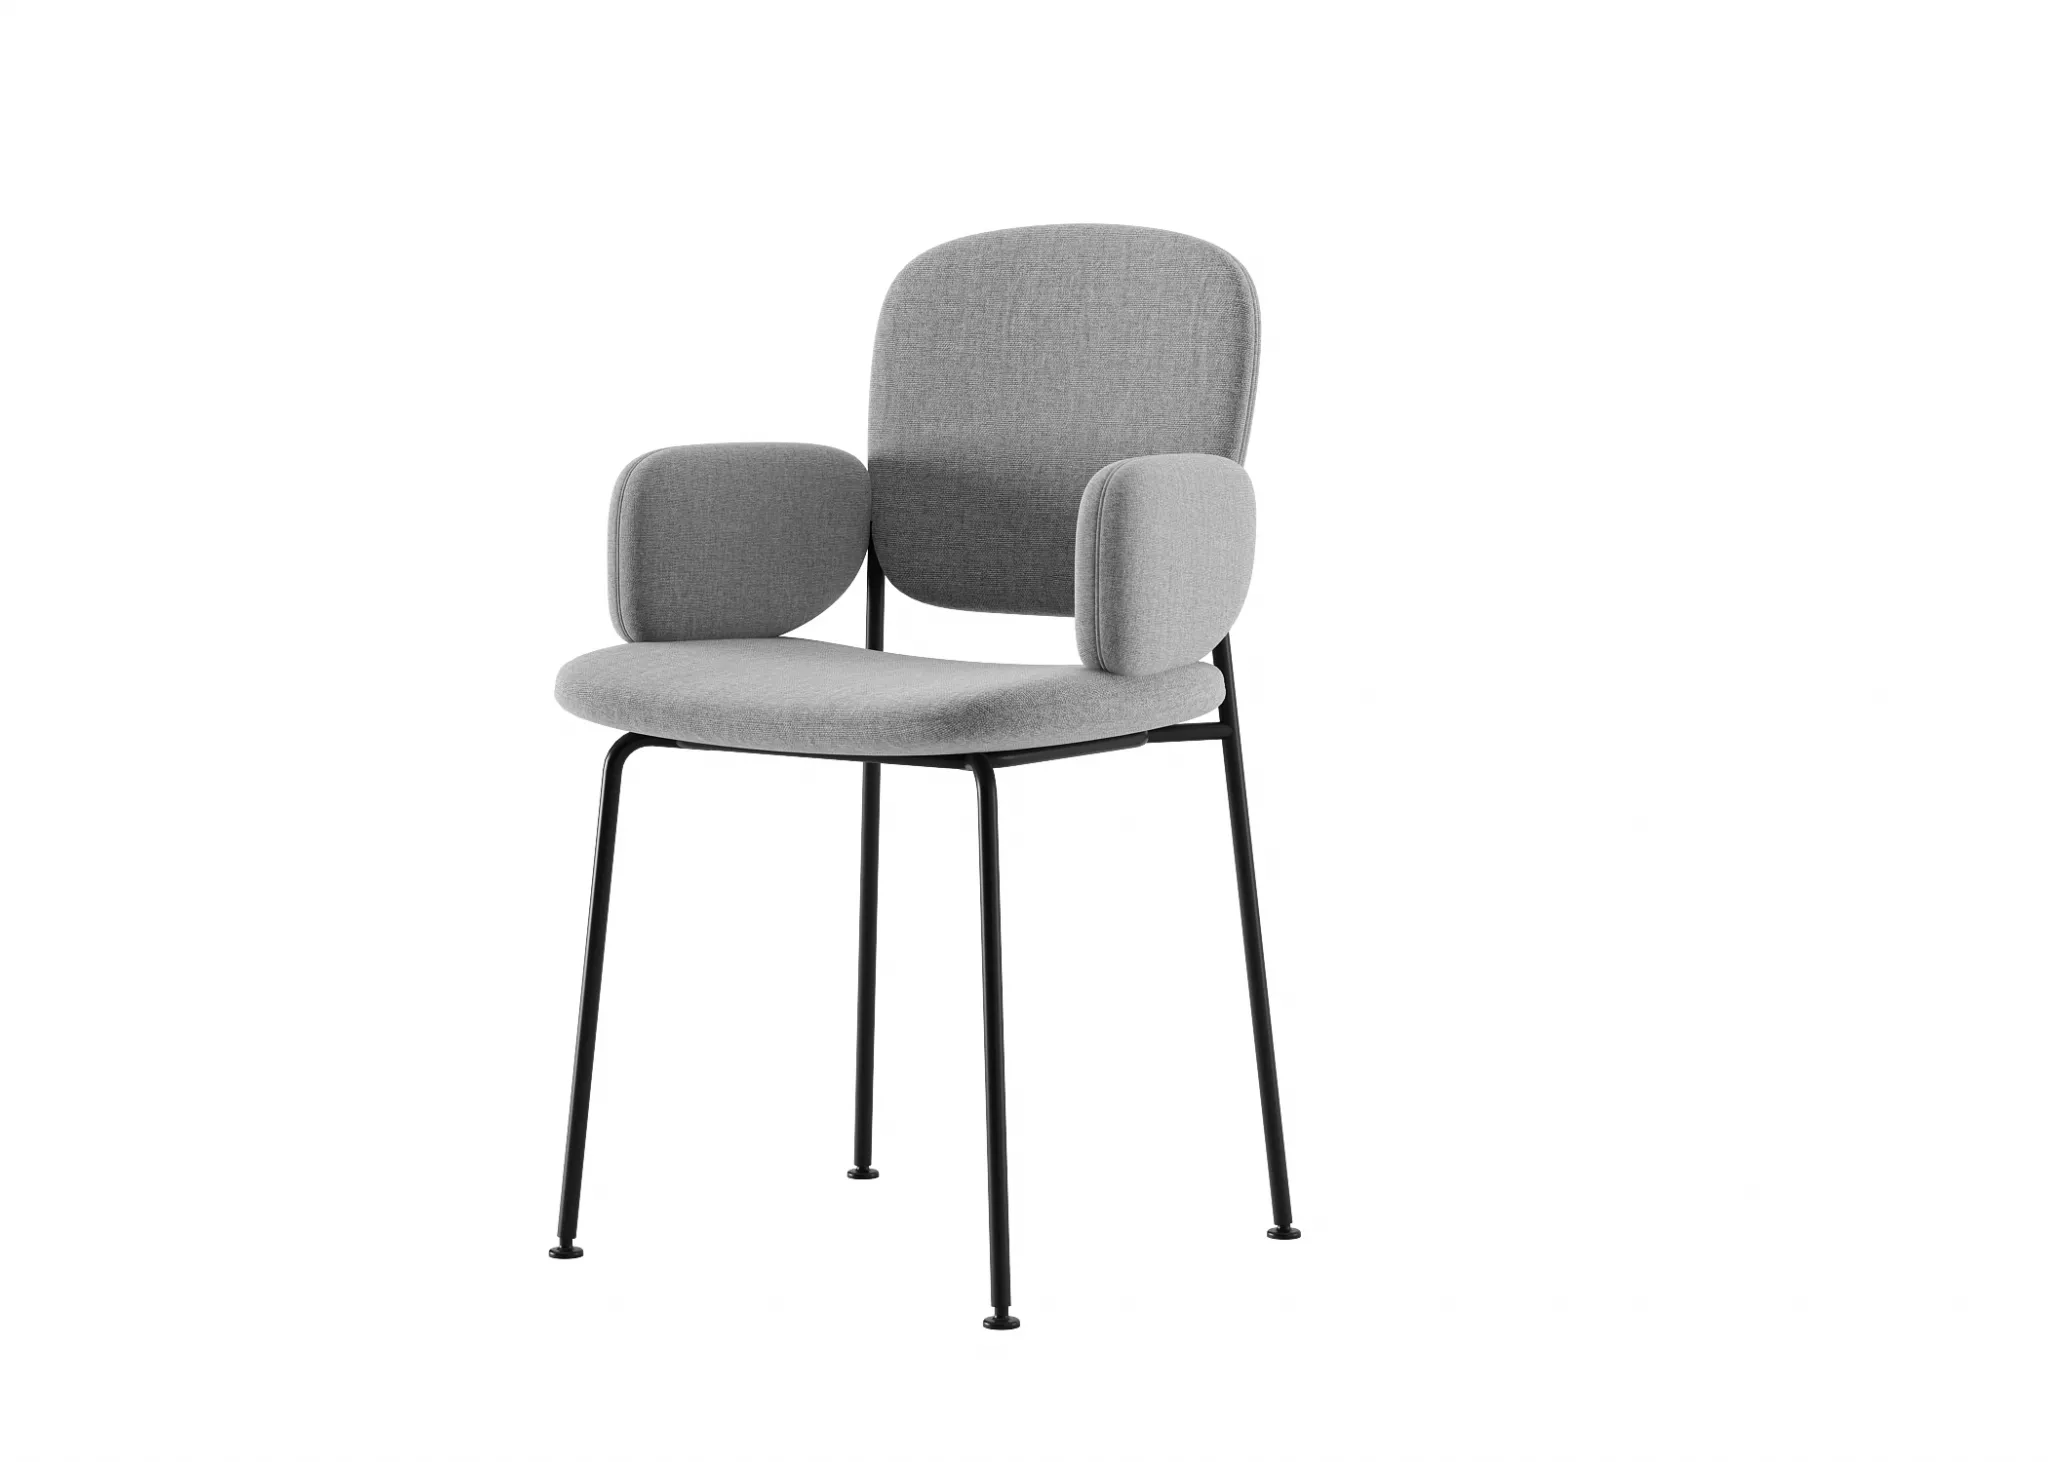 FURNITURE 3D MODELS – CHAIRS – 0317